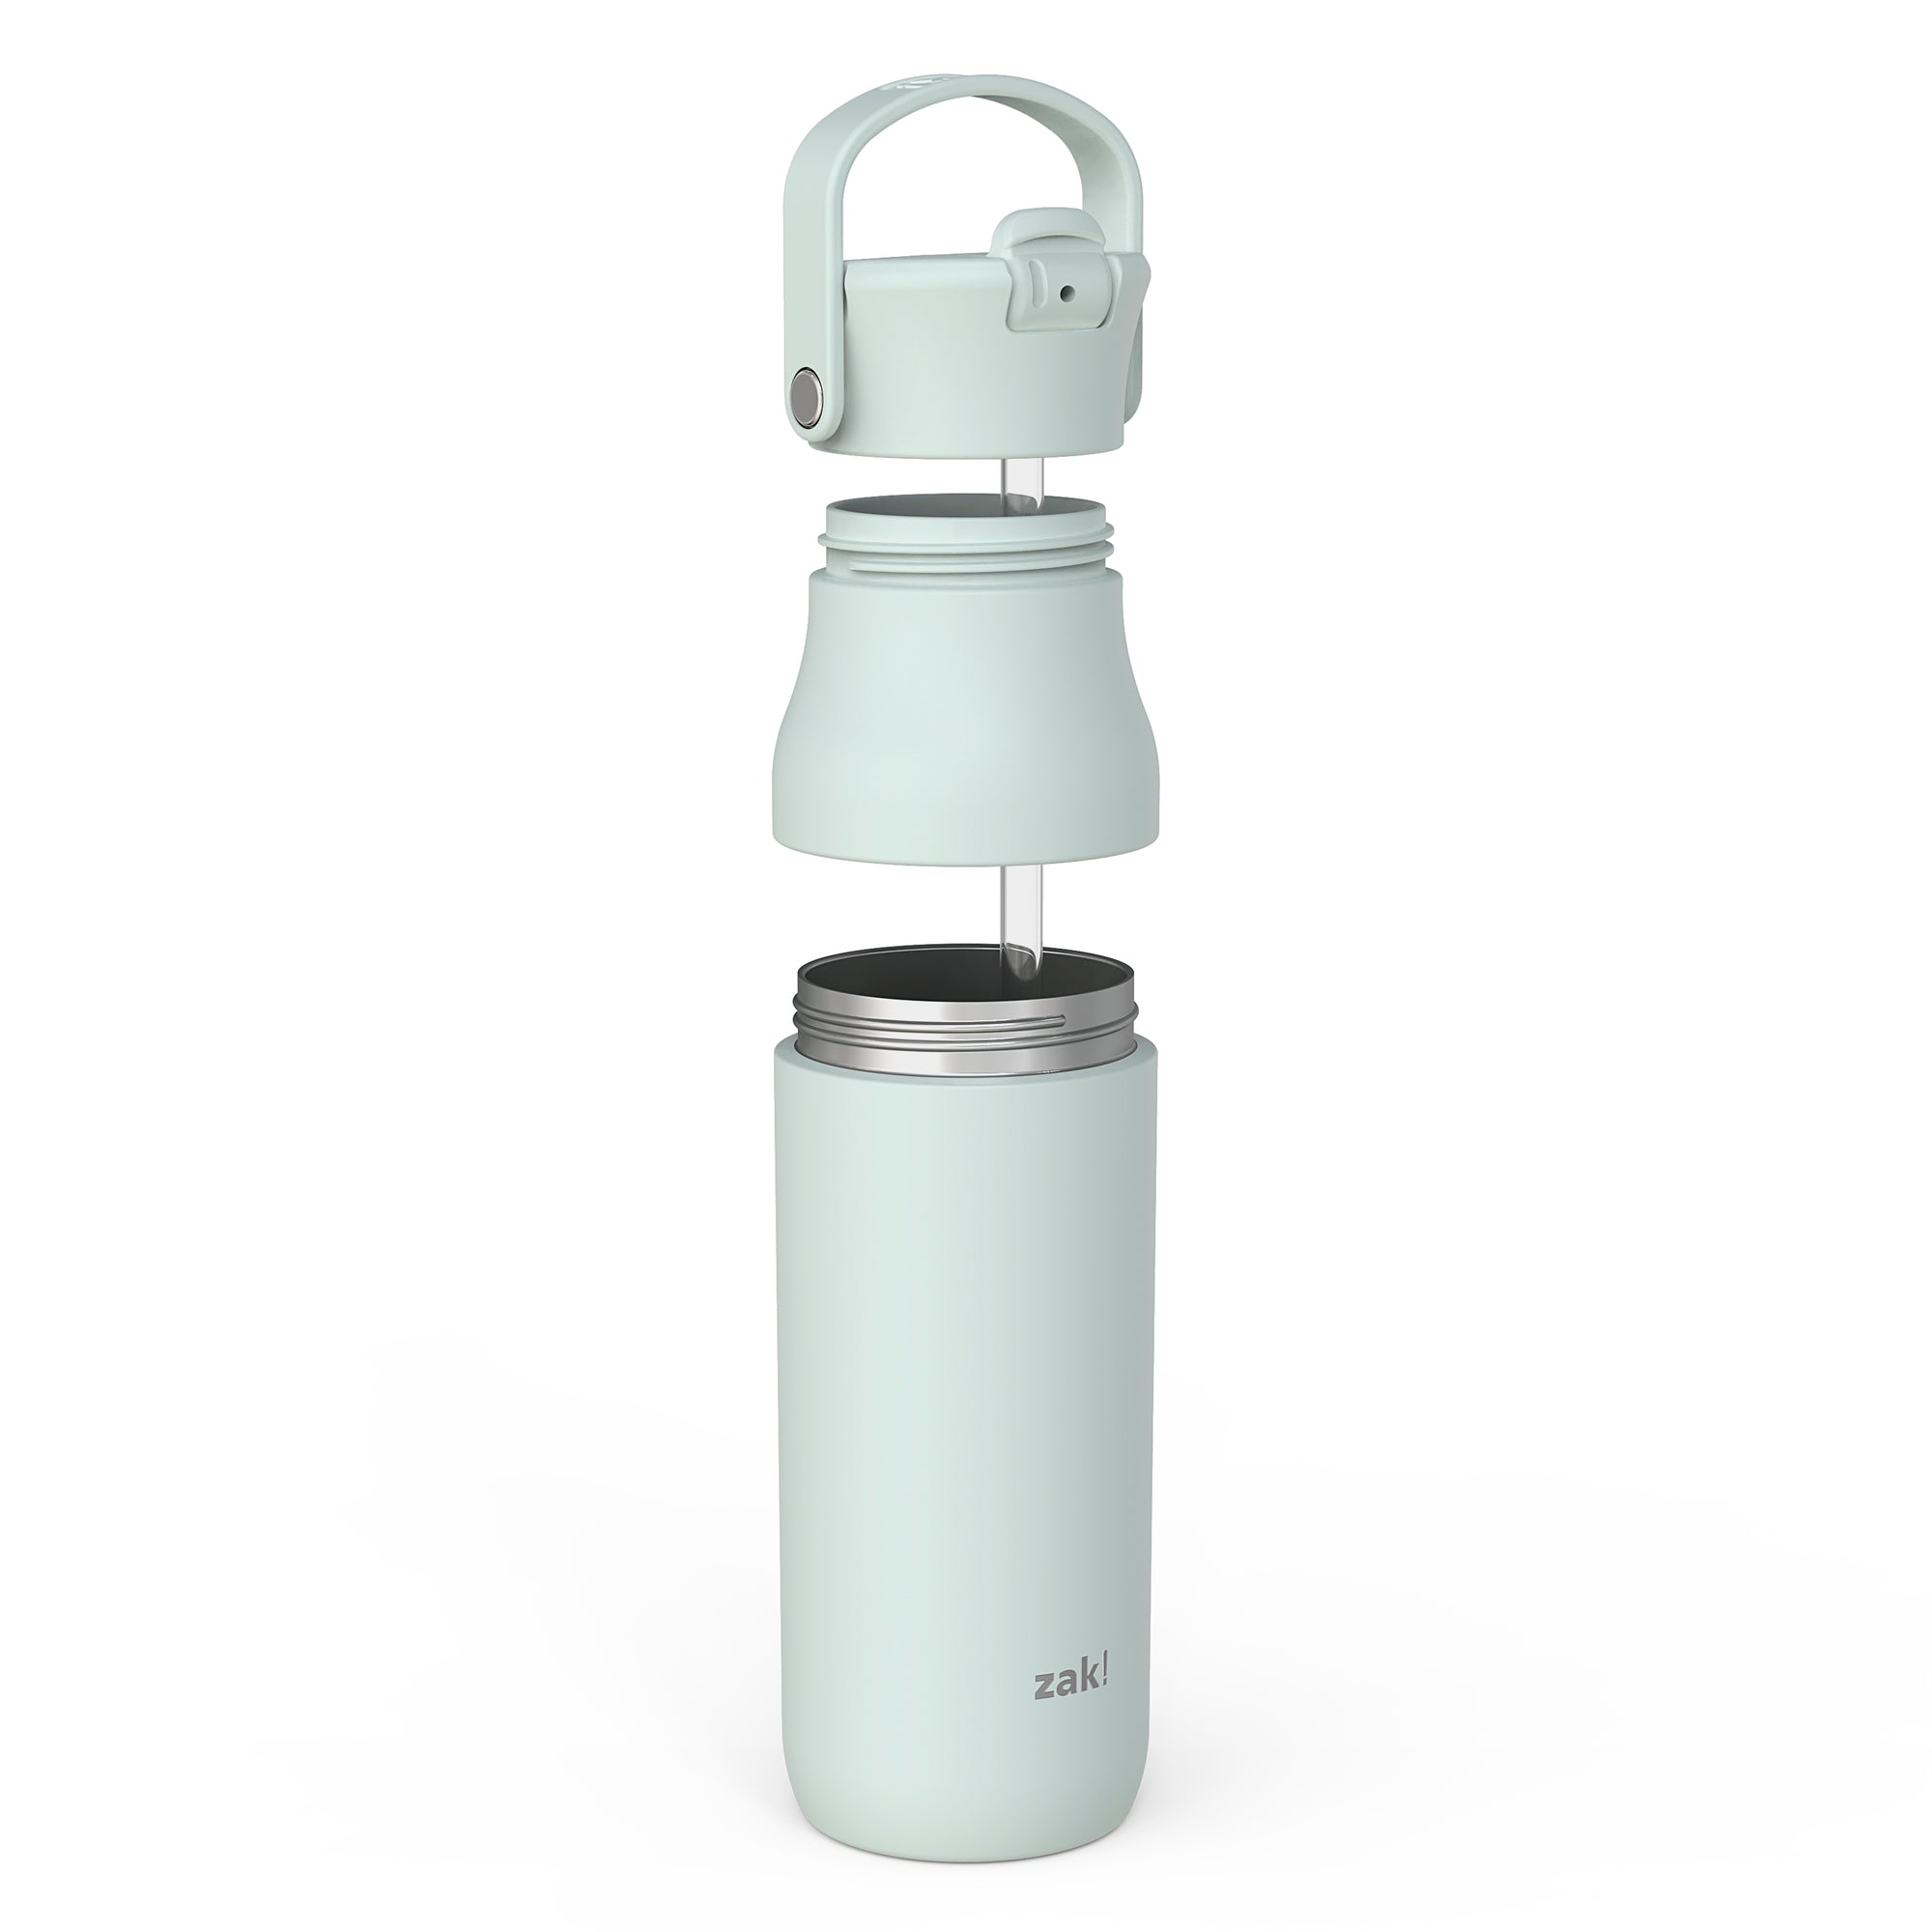 Harmony Recycled Stainless Steel Insulated Water Bottle with Flip-Up Straw Spout - Icicle, 32 ounces